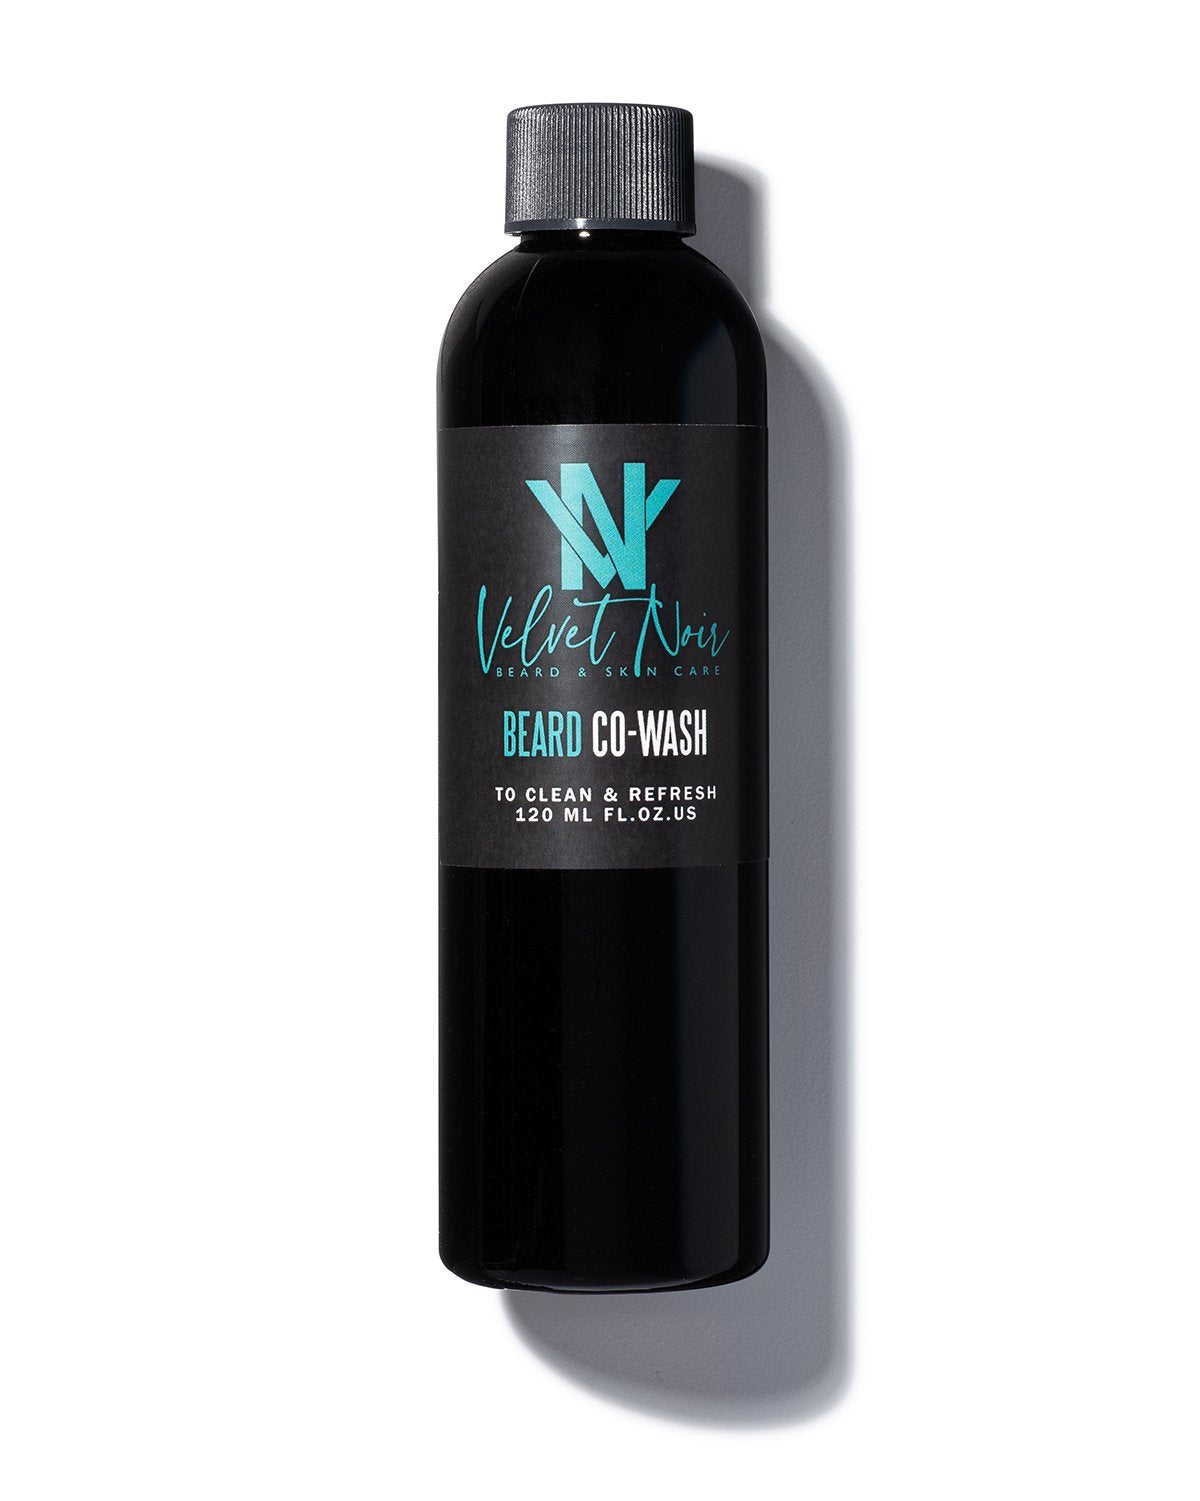 Velvet Noir Beard Co-Wash Beauty Supply store, all natural products for men. The wh shop is the sephora for black owned brands